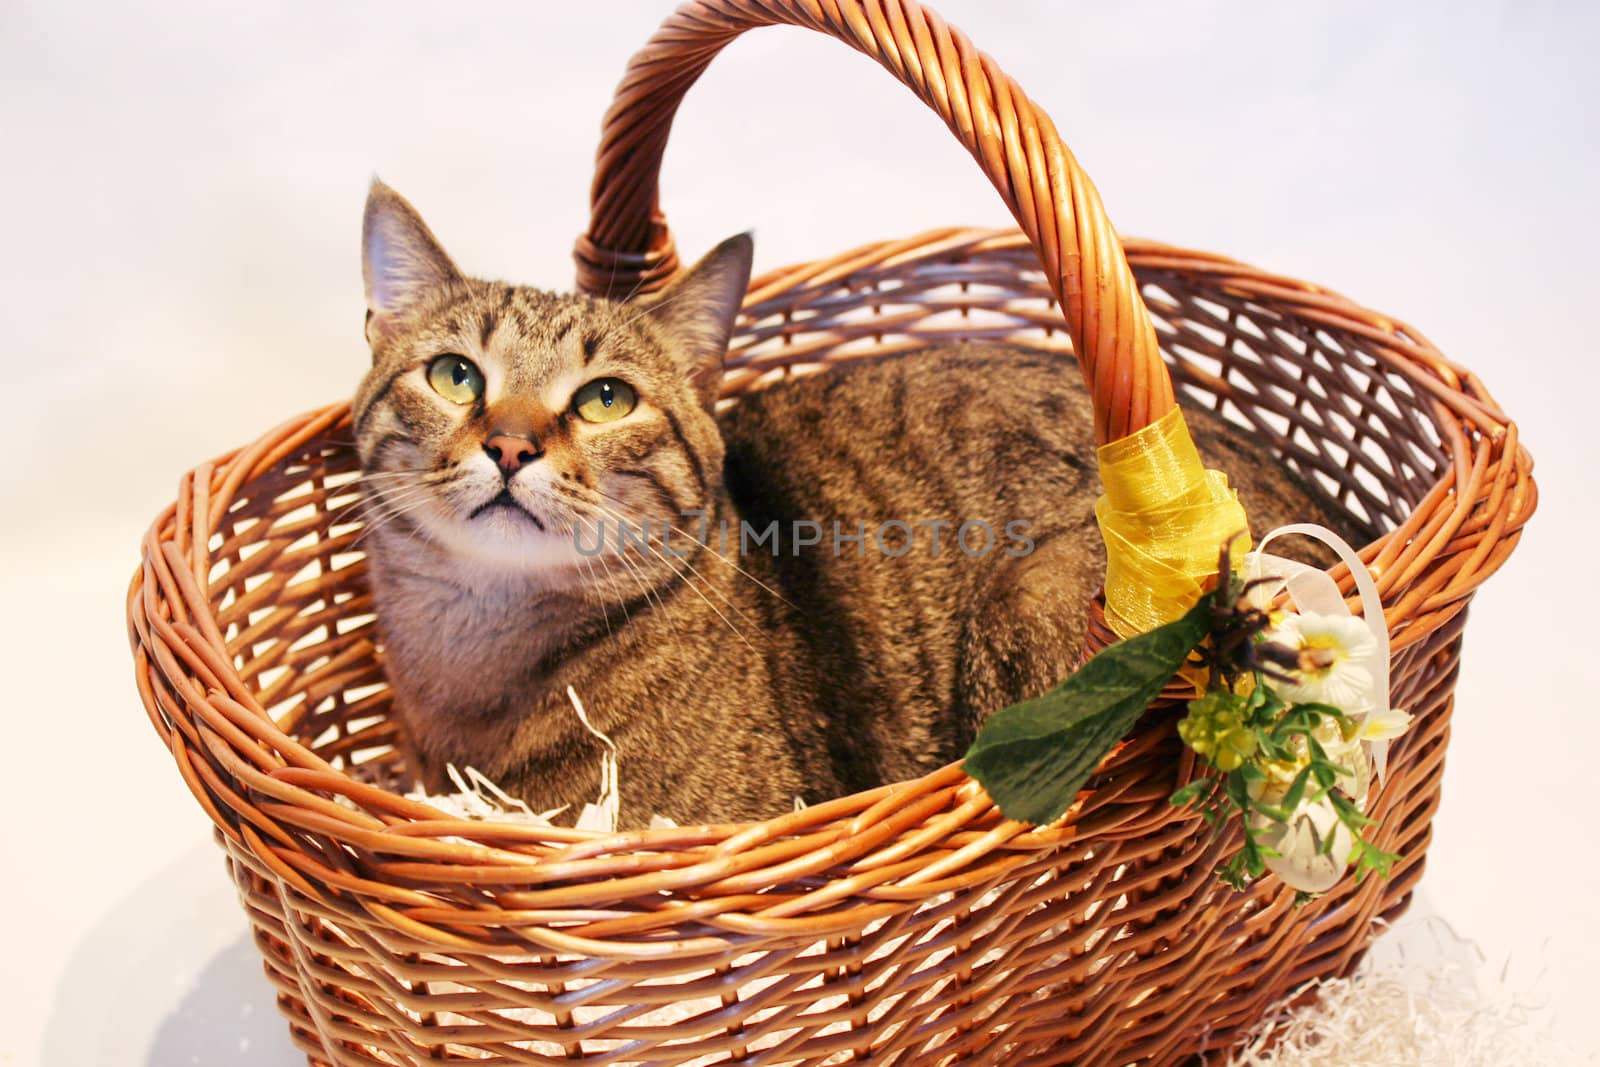 Cute European tabby cat in a basket with flowers